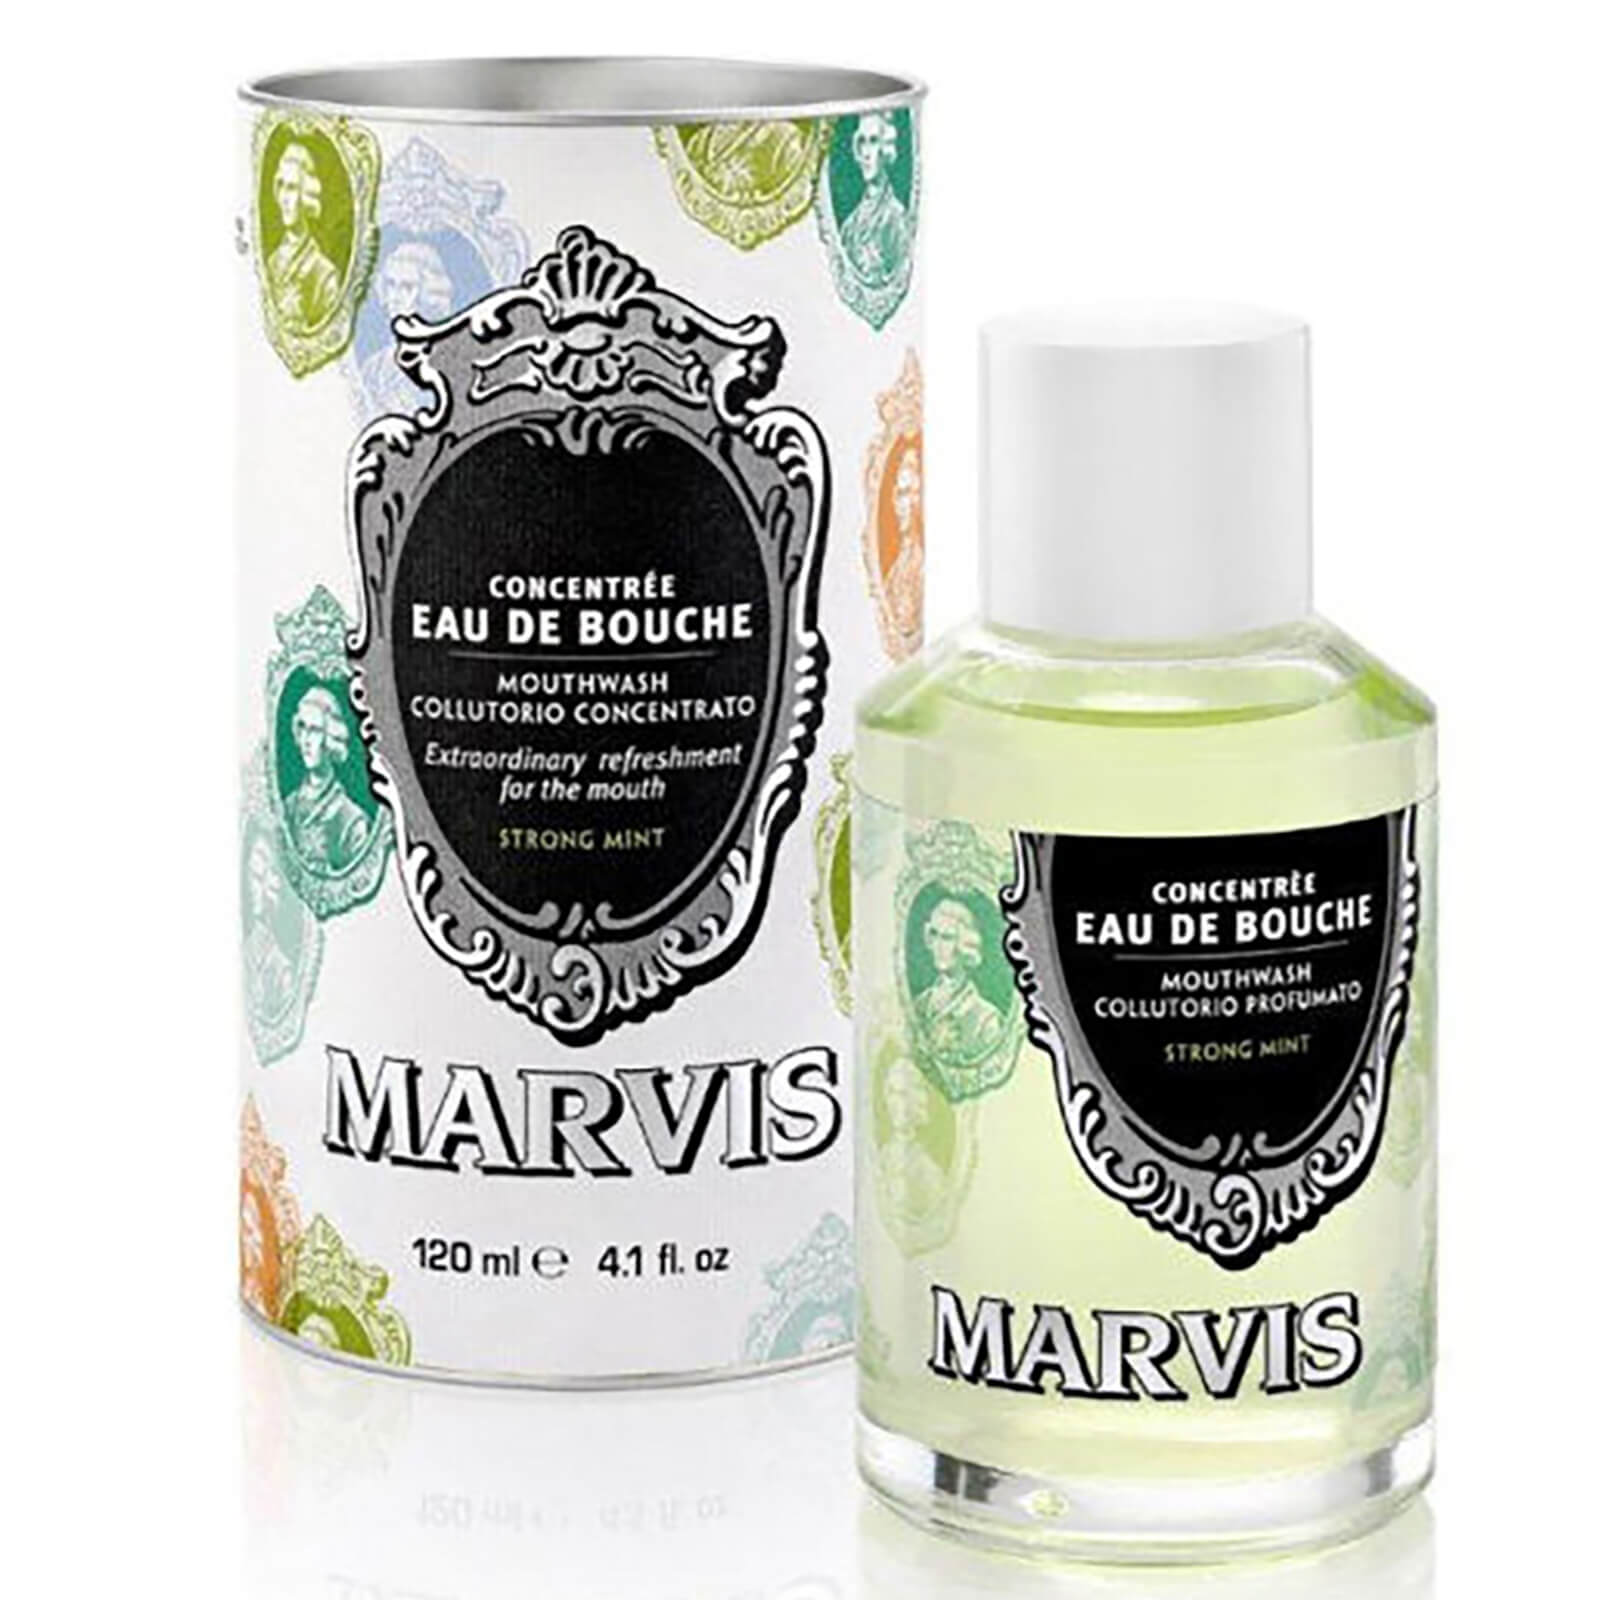 Marvis Concentrated Eau De Bouche Mouthwash (120ML) , Mouth Wash, Marvis, Working Title